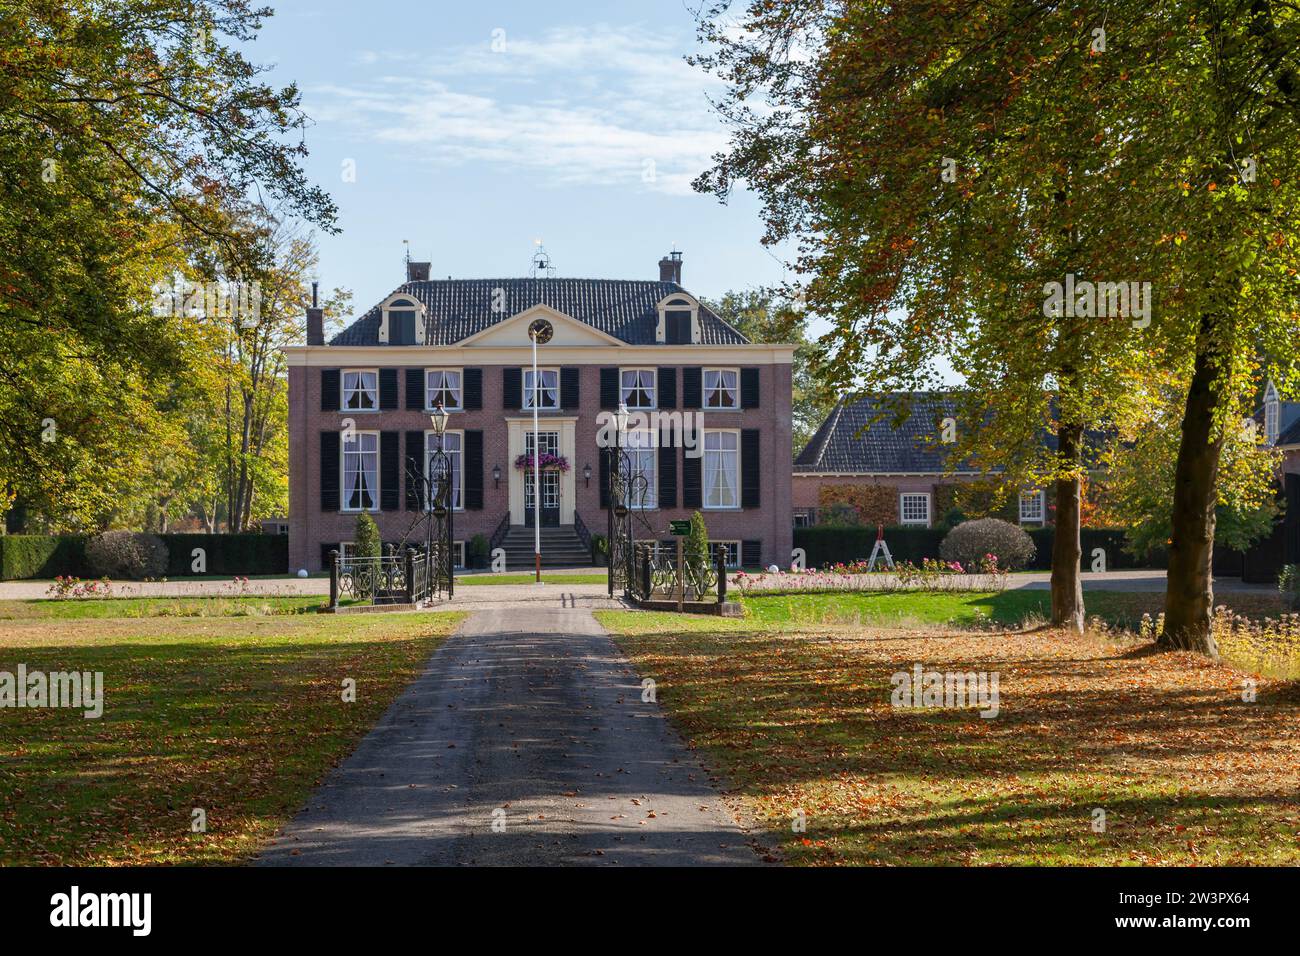 Huis 't Zelle, Landgoed Zelle, country estate in the Dutch province of Gelderland. The historic centre of the estate was designated as a complex Stock Photo